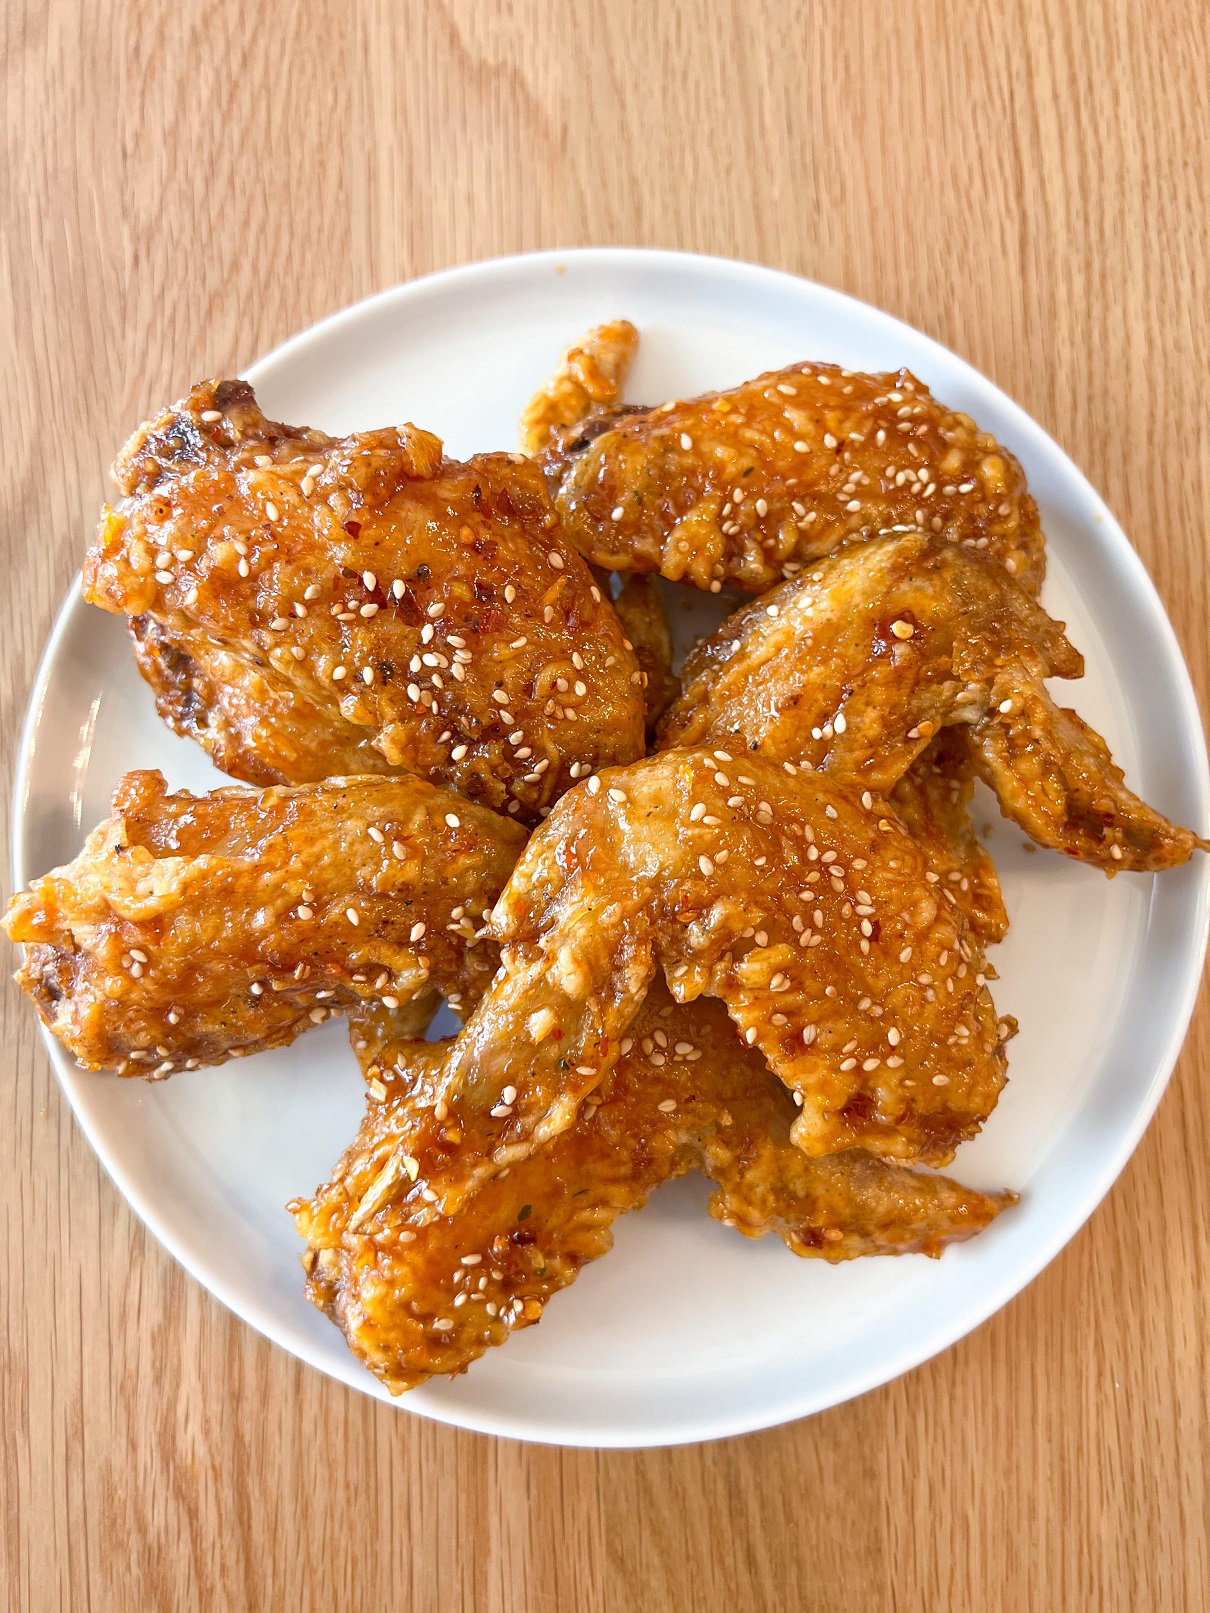 Pressure Cooker Chicken Wings - The Buttered Home